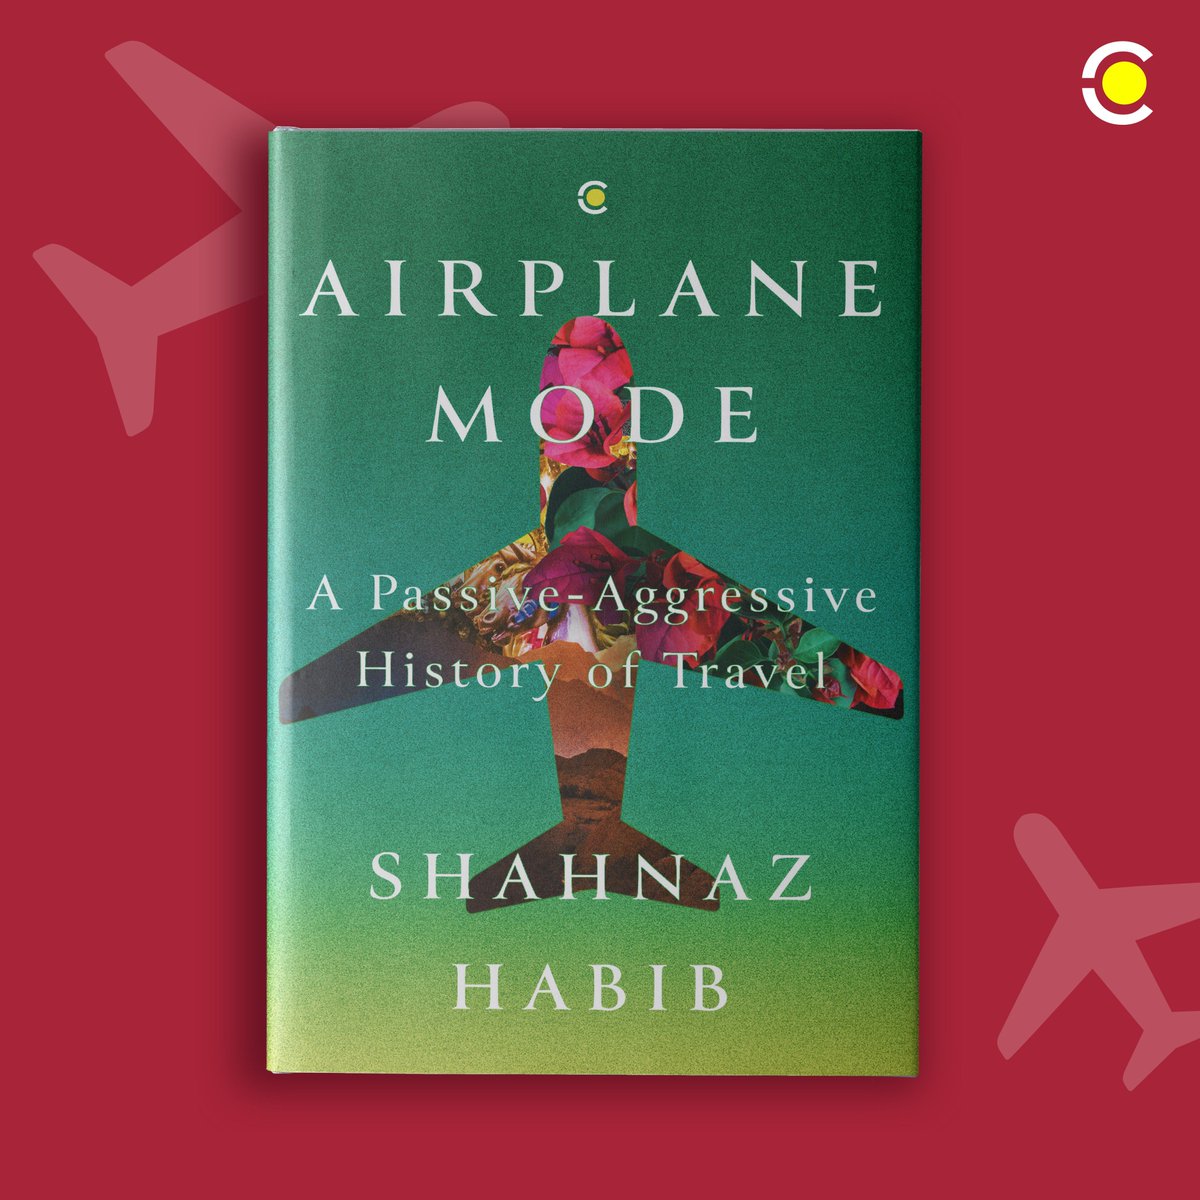 'We will always have Paris' - the film Casablanca didn't make Paris the go-to destination for all tourists, someone else did! To know how, read @mixedmsgs' Airplane Mode! Available at all bookstores and online.